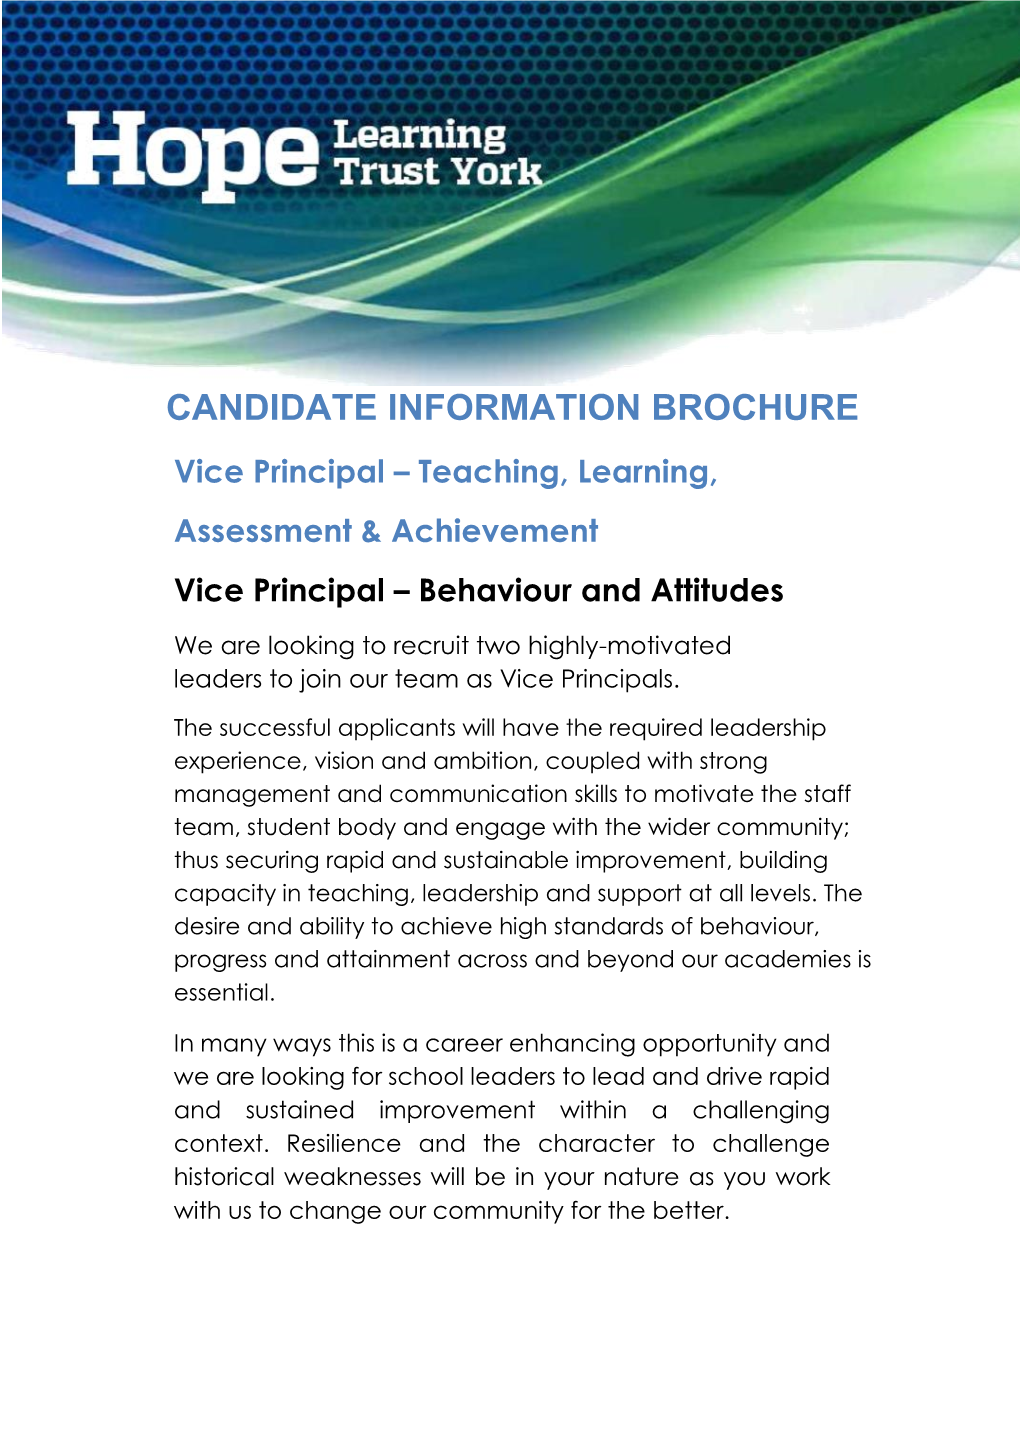 CANDIDATE INFORMATION BROCHURE Vice Principal – Teaching, Learning, Assessment & Achievement Vice Principal – Behaviour and Attitudes